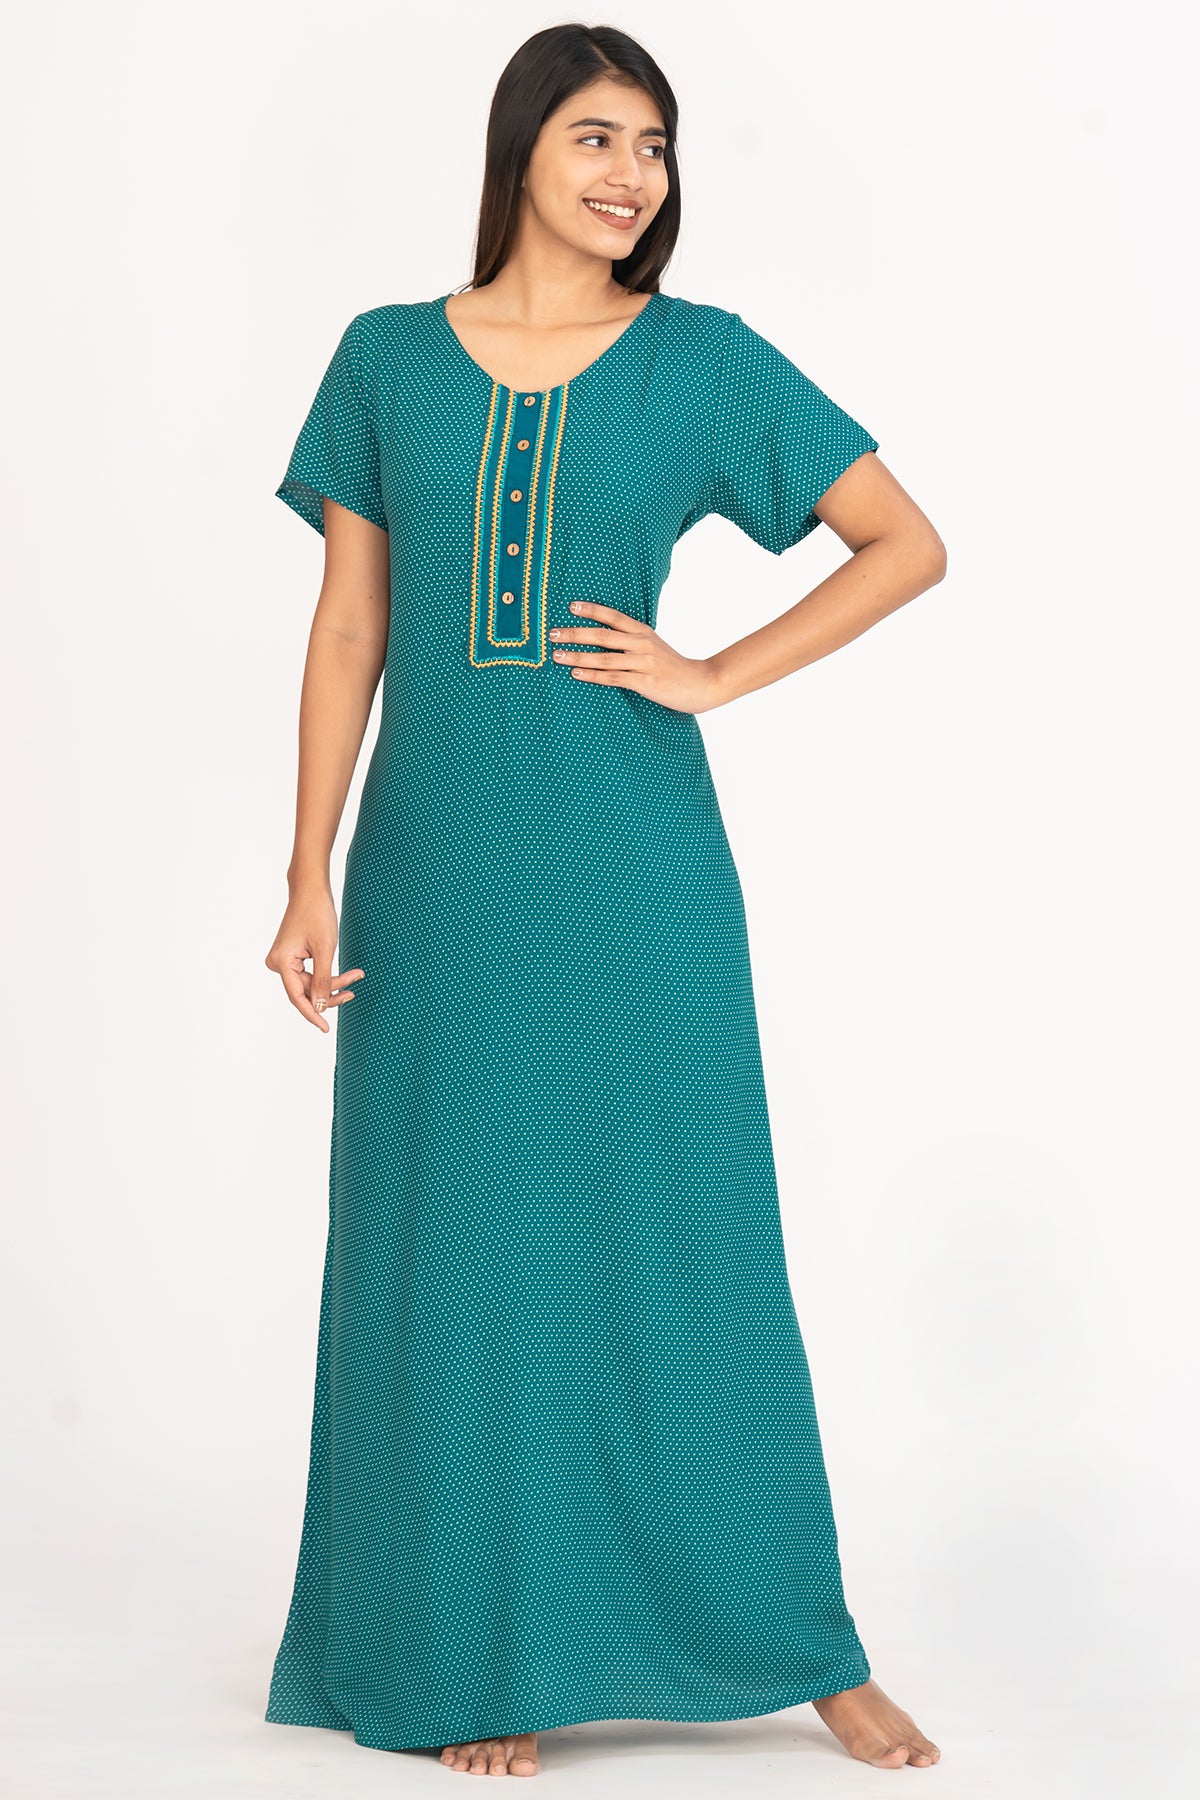 All Over Ditsy Polka Dot Print With Contrast Embroidered Yoke Nighty Green